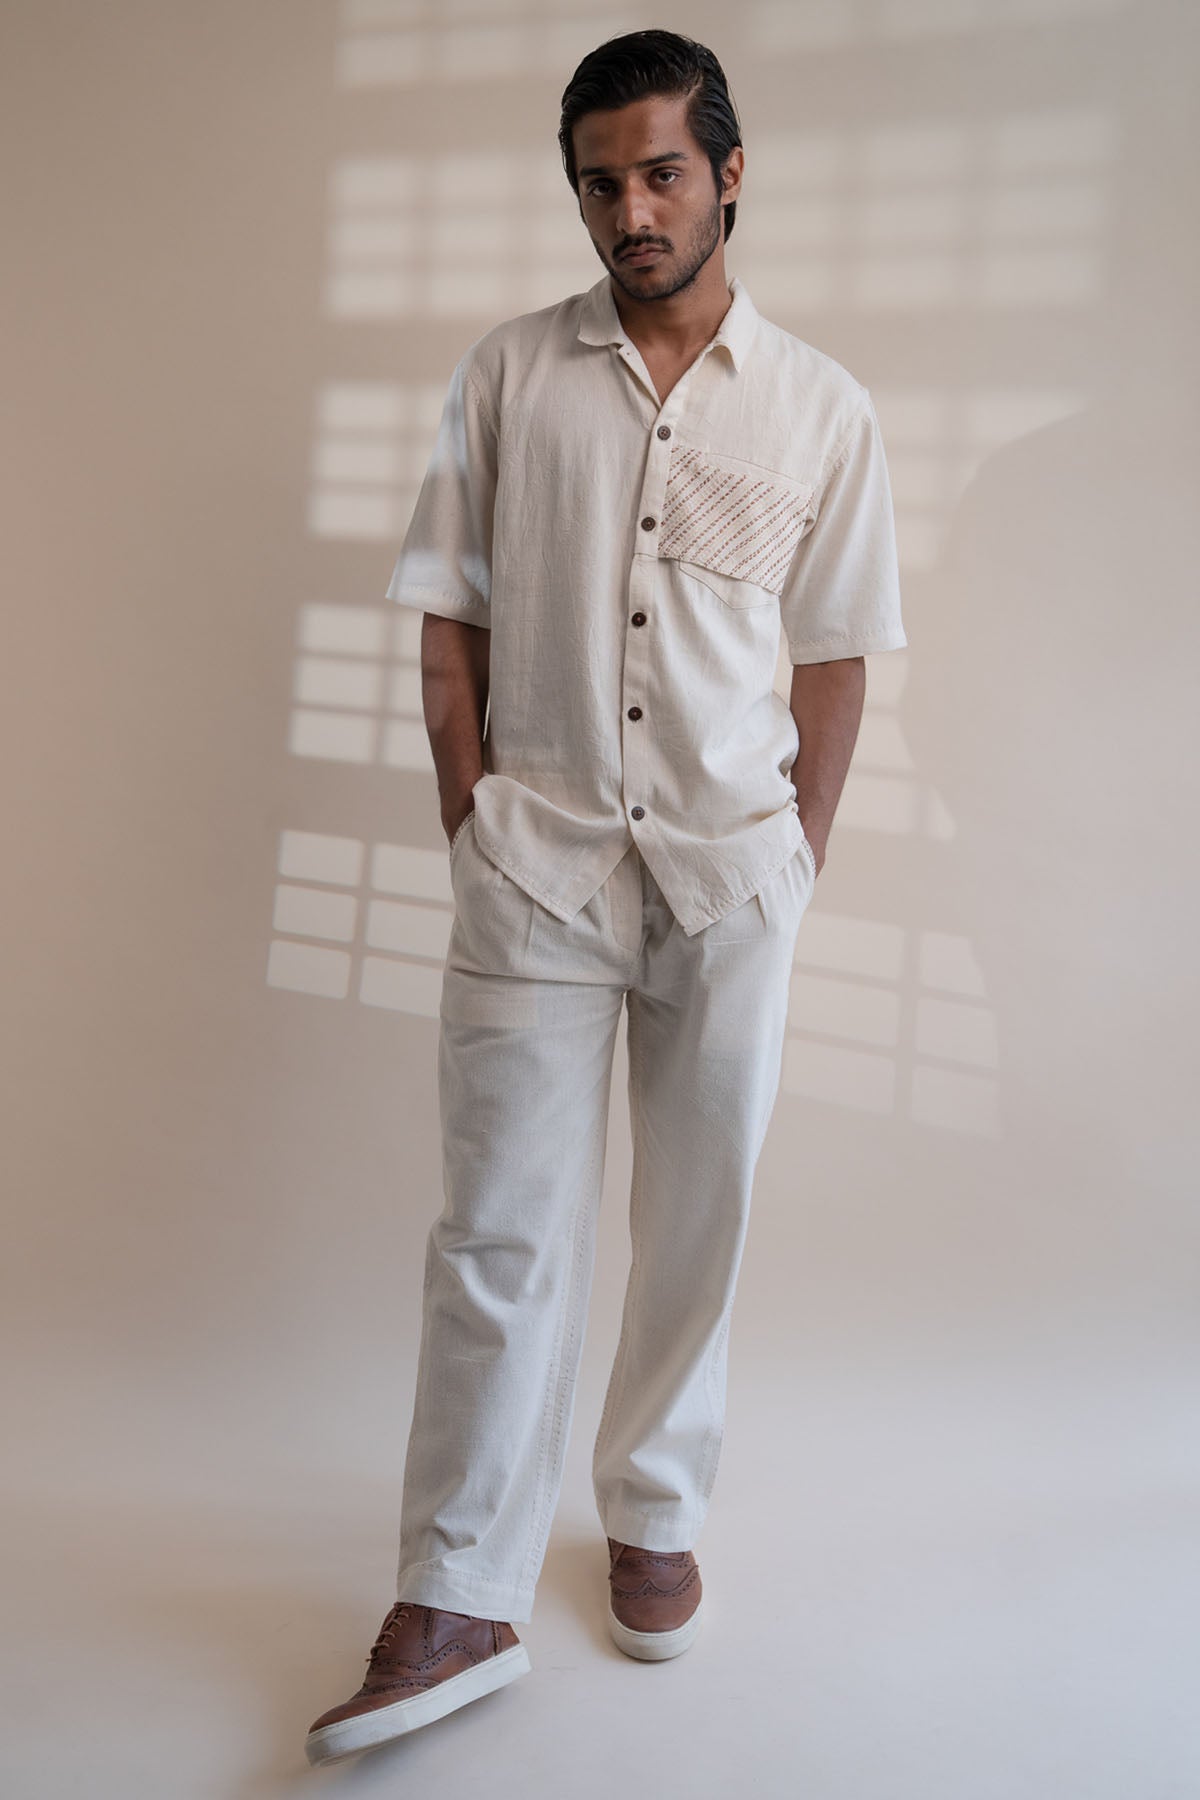 Lafaani_Kora shirt crafted in 100% cotton fibres and natural materials